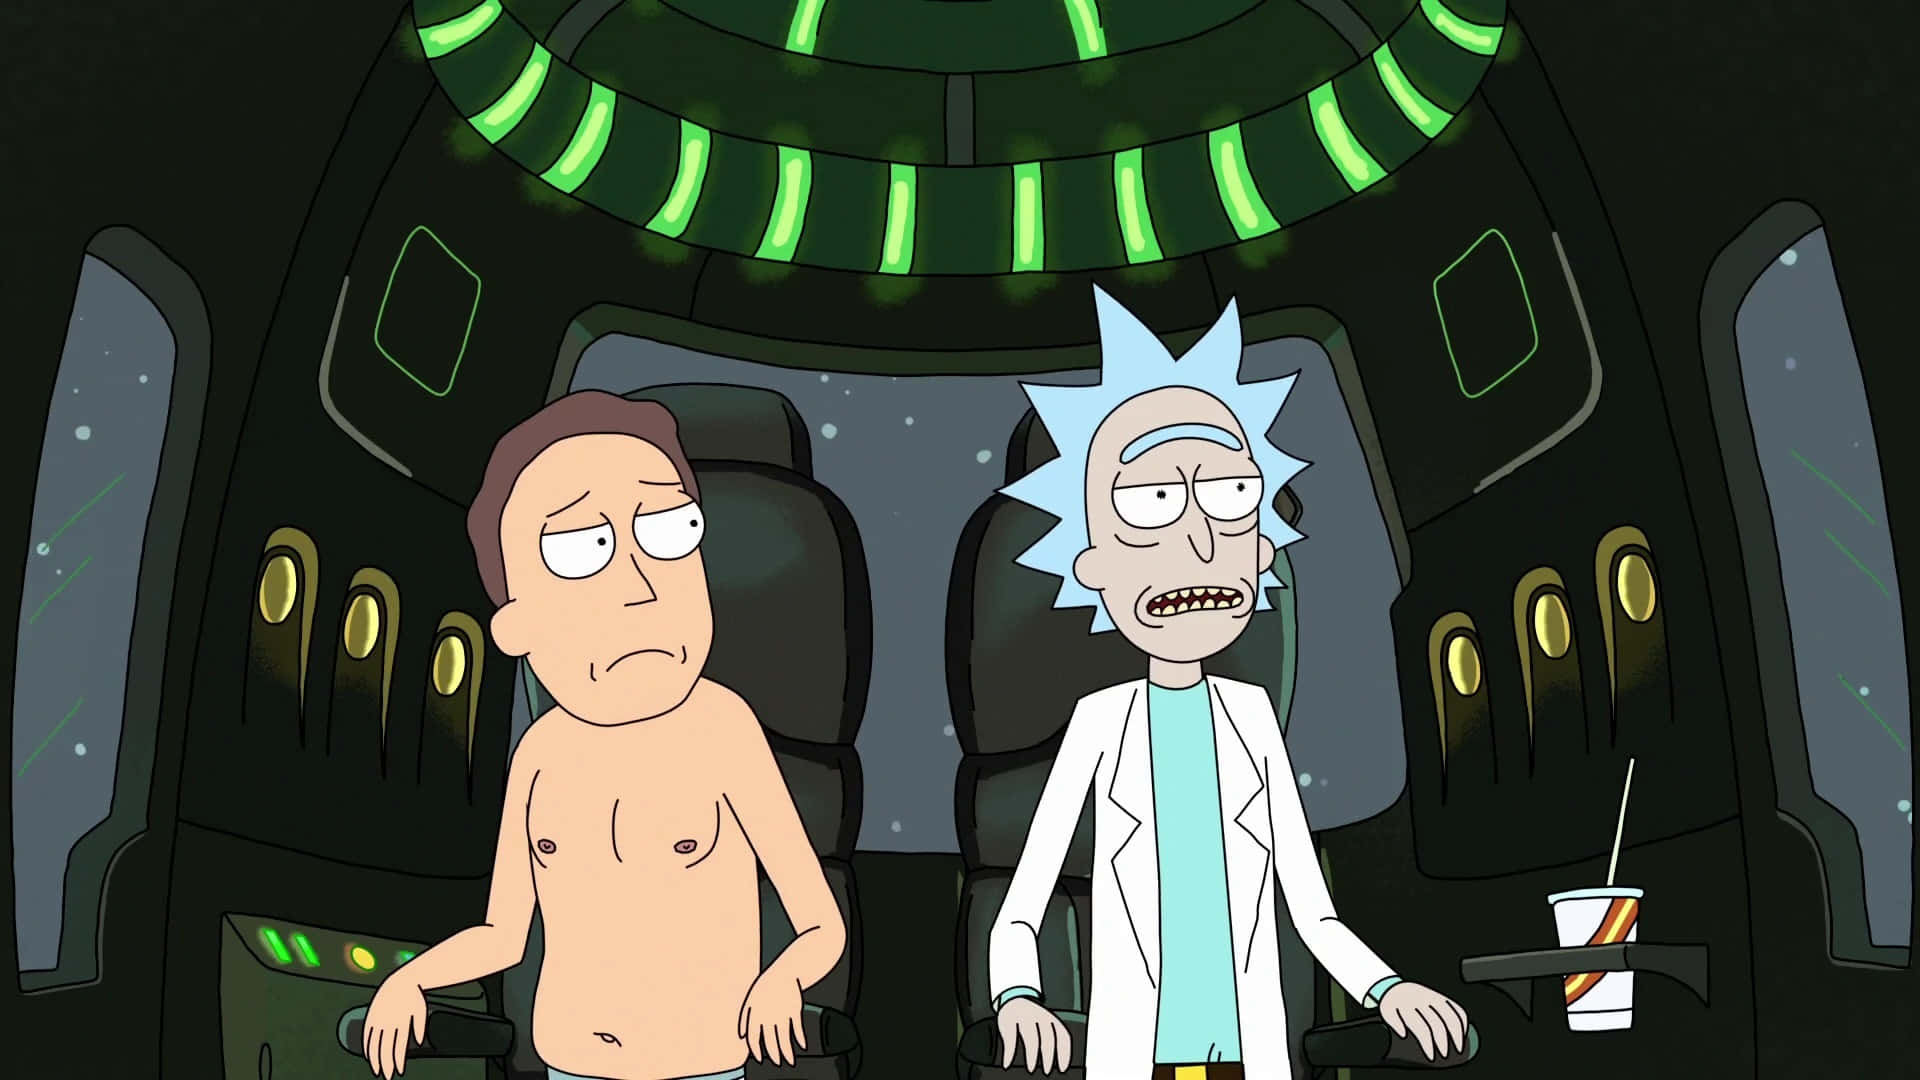 "Exploring the galaxy with Rick and Morty".